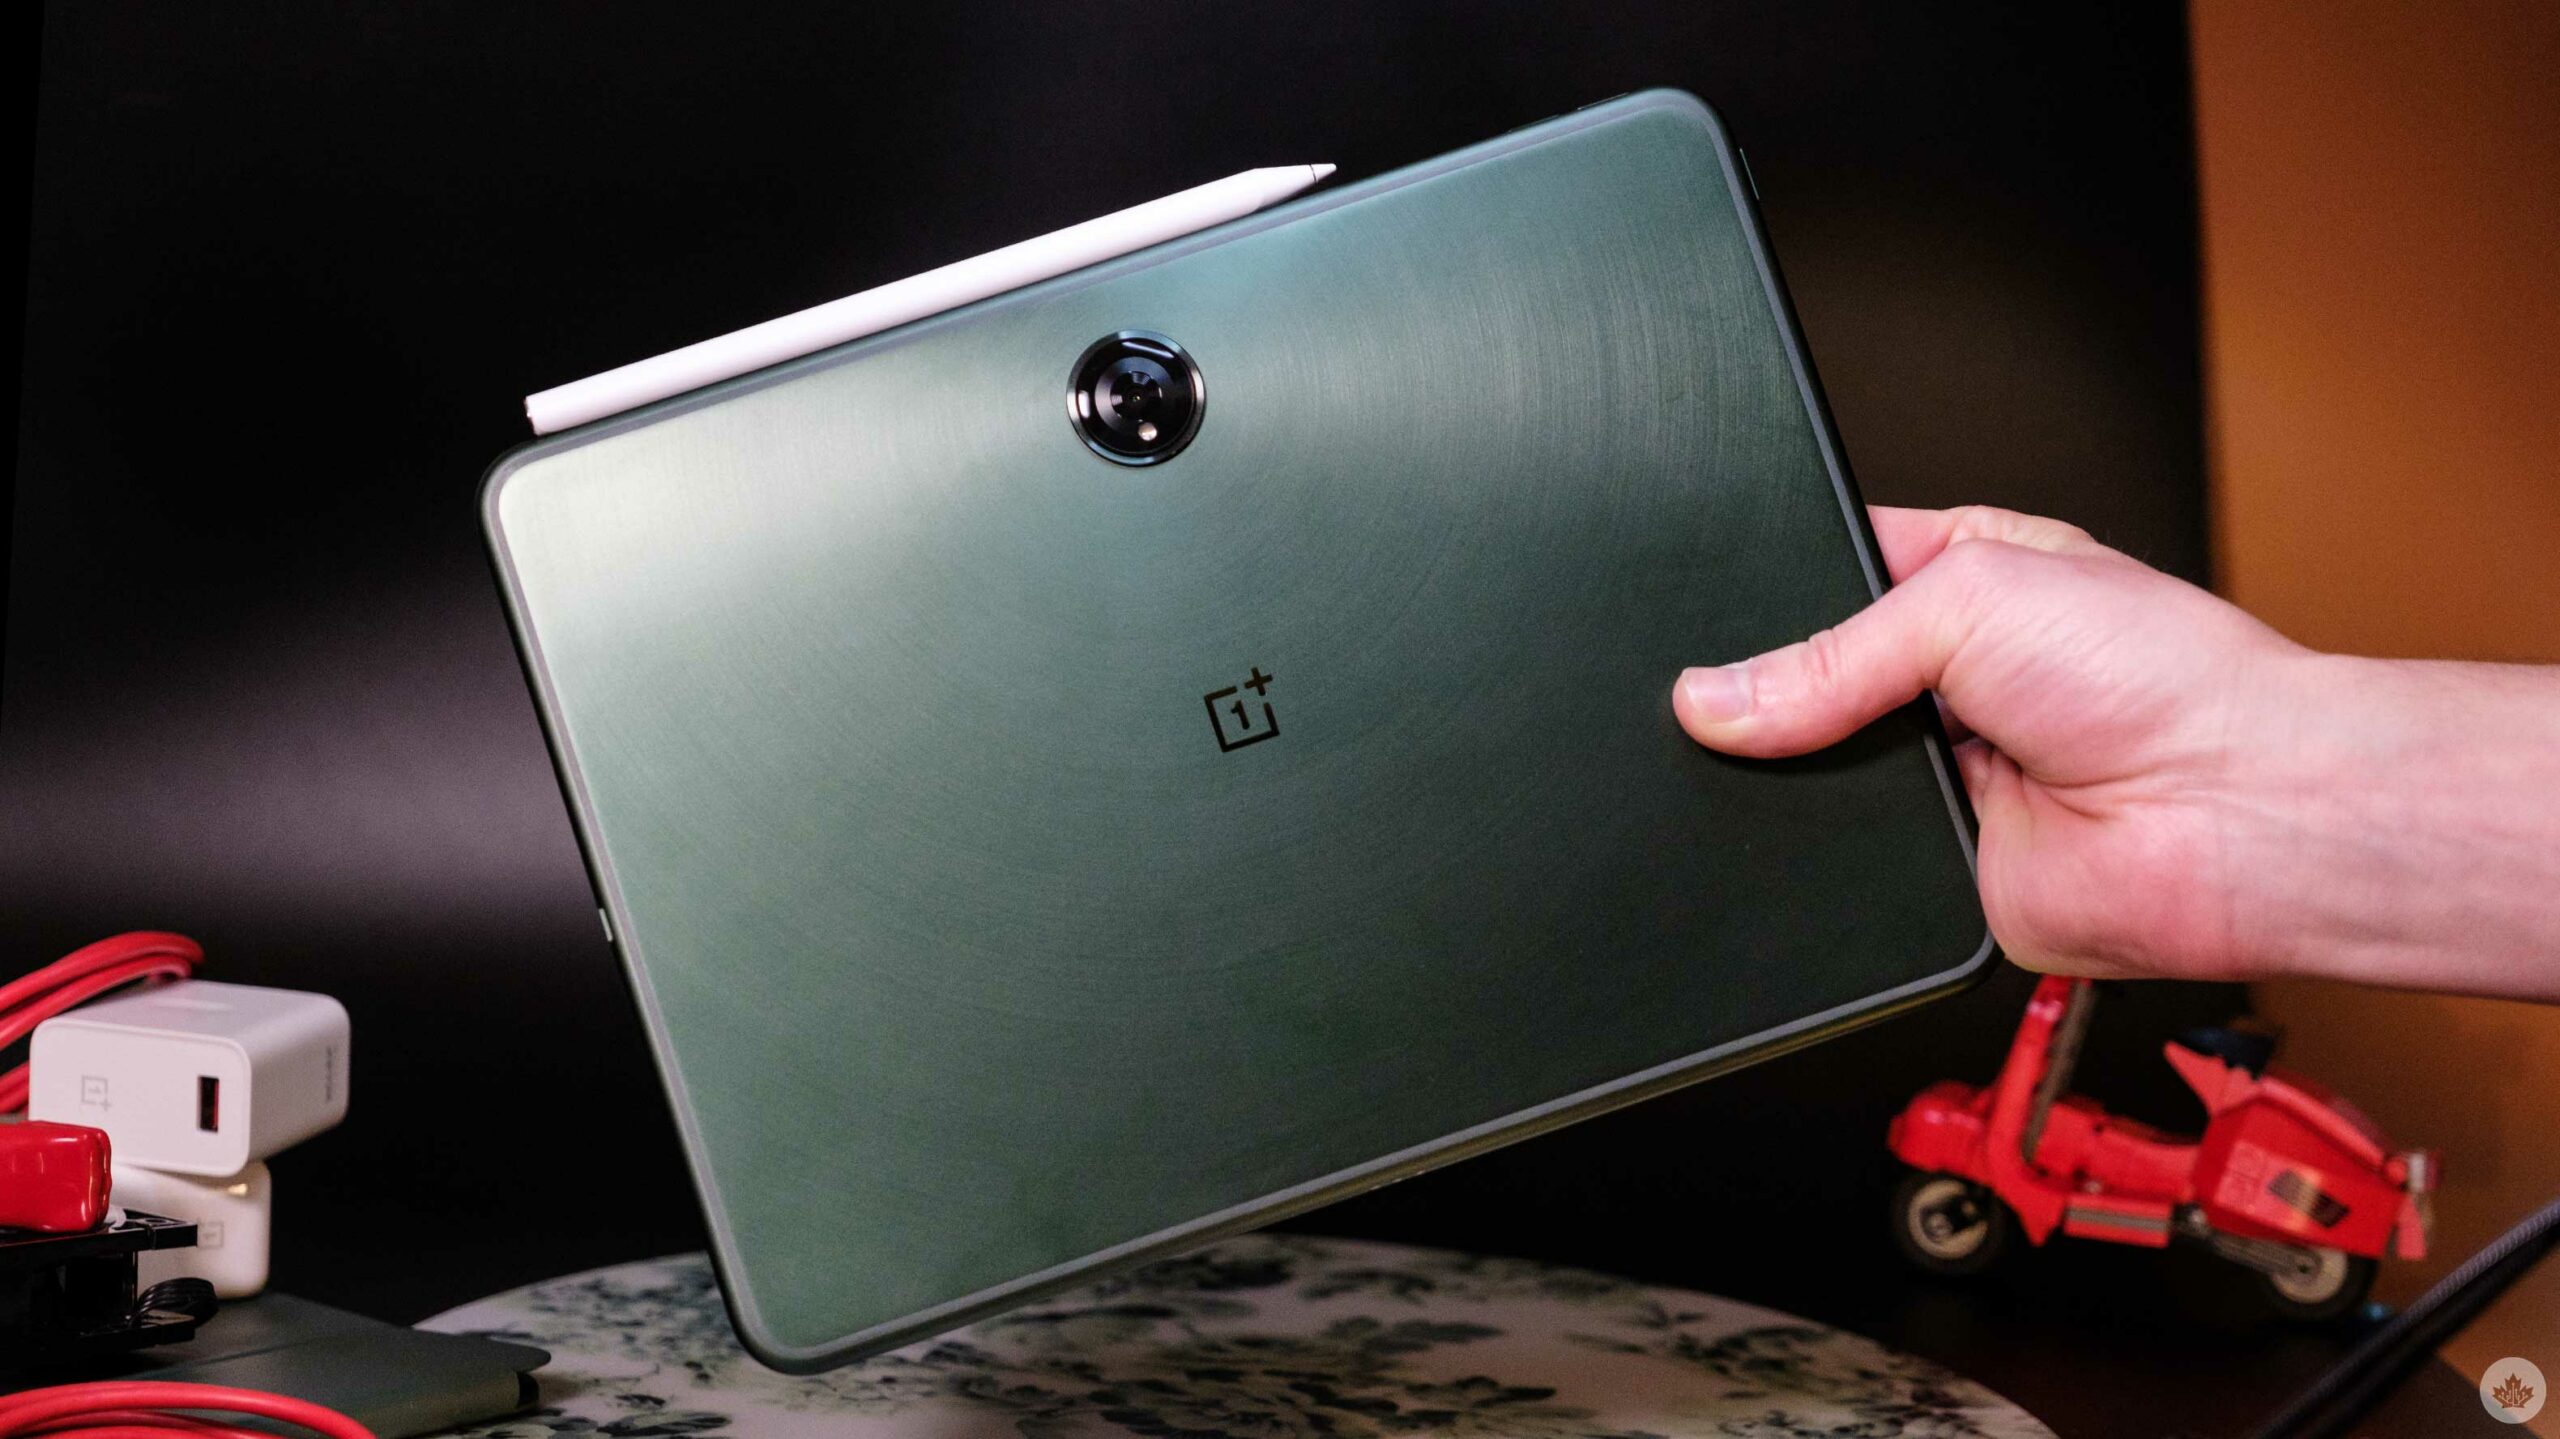 OnePlus Pad review: I really wanted to like this tablet, but it